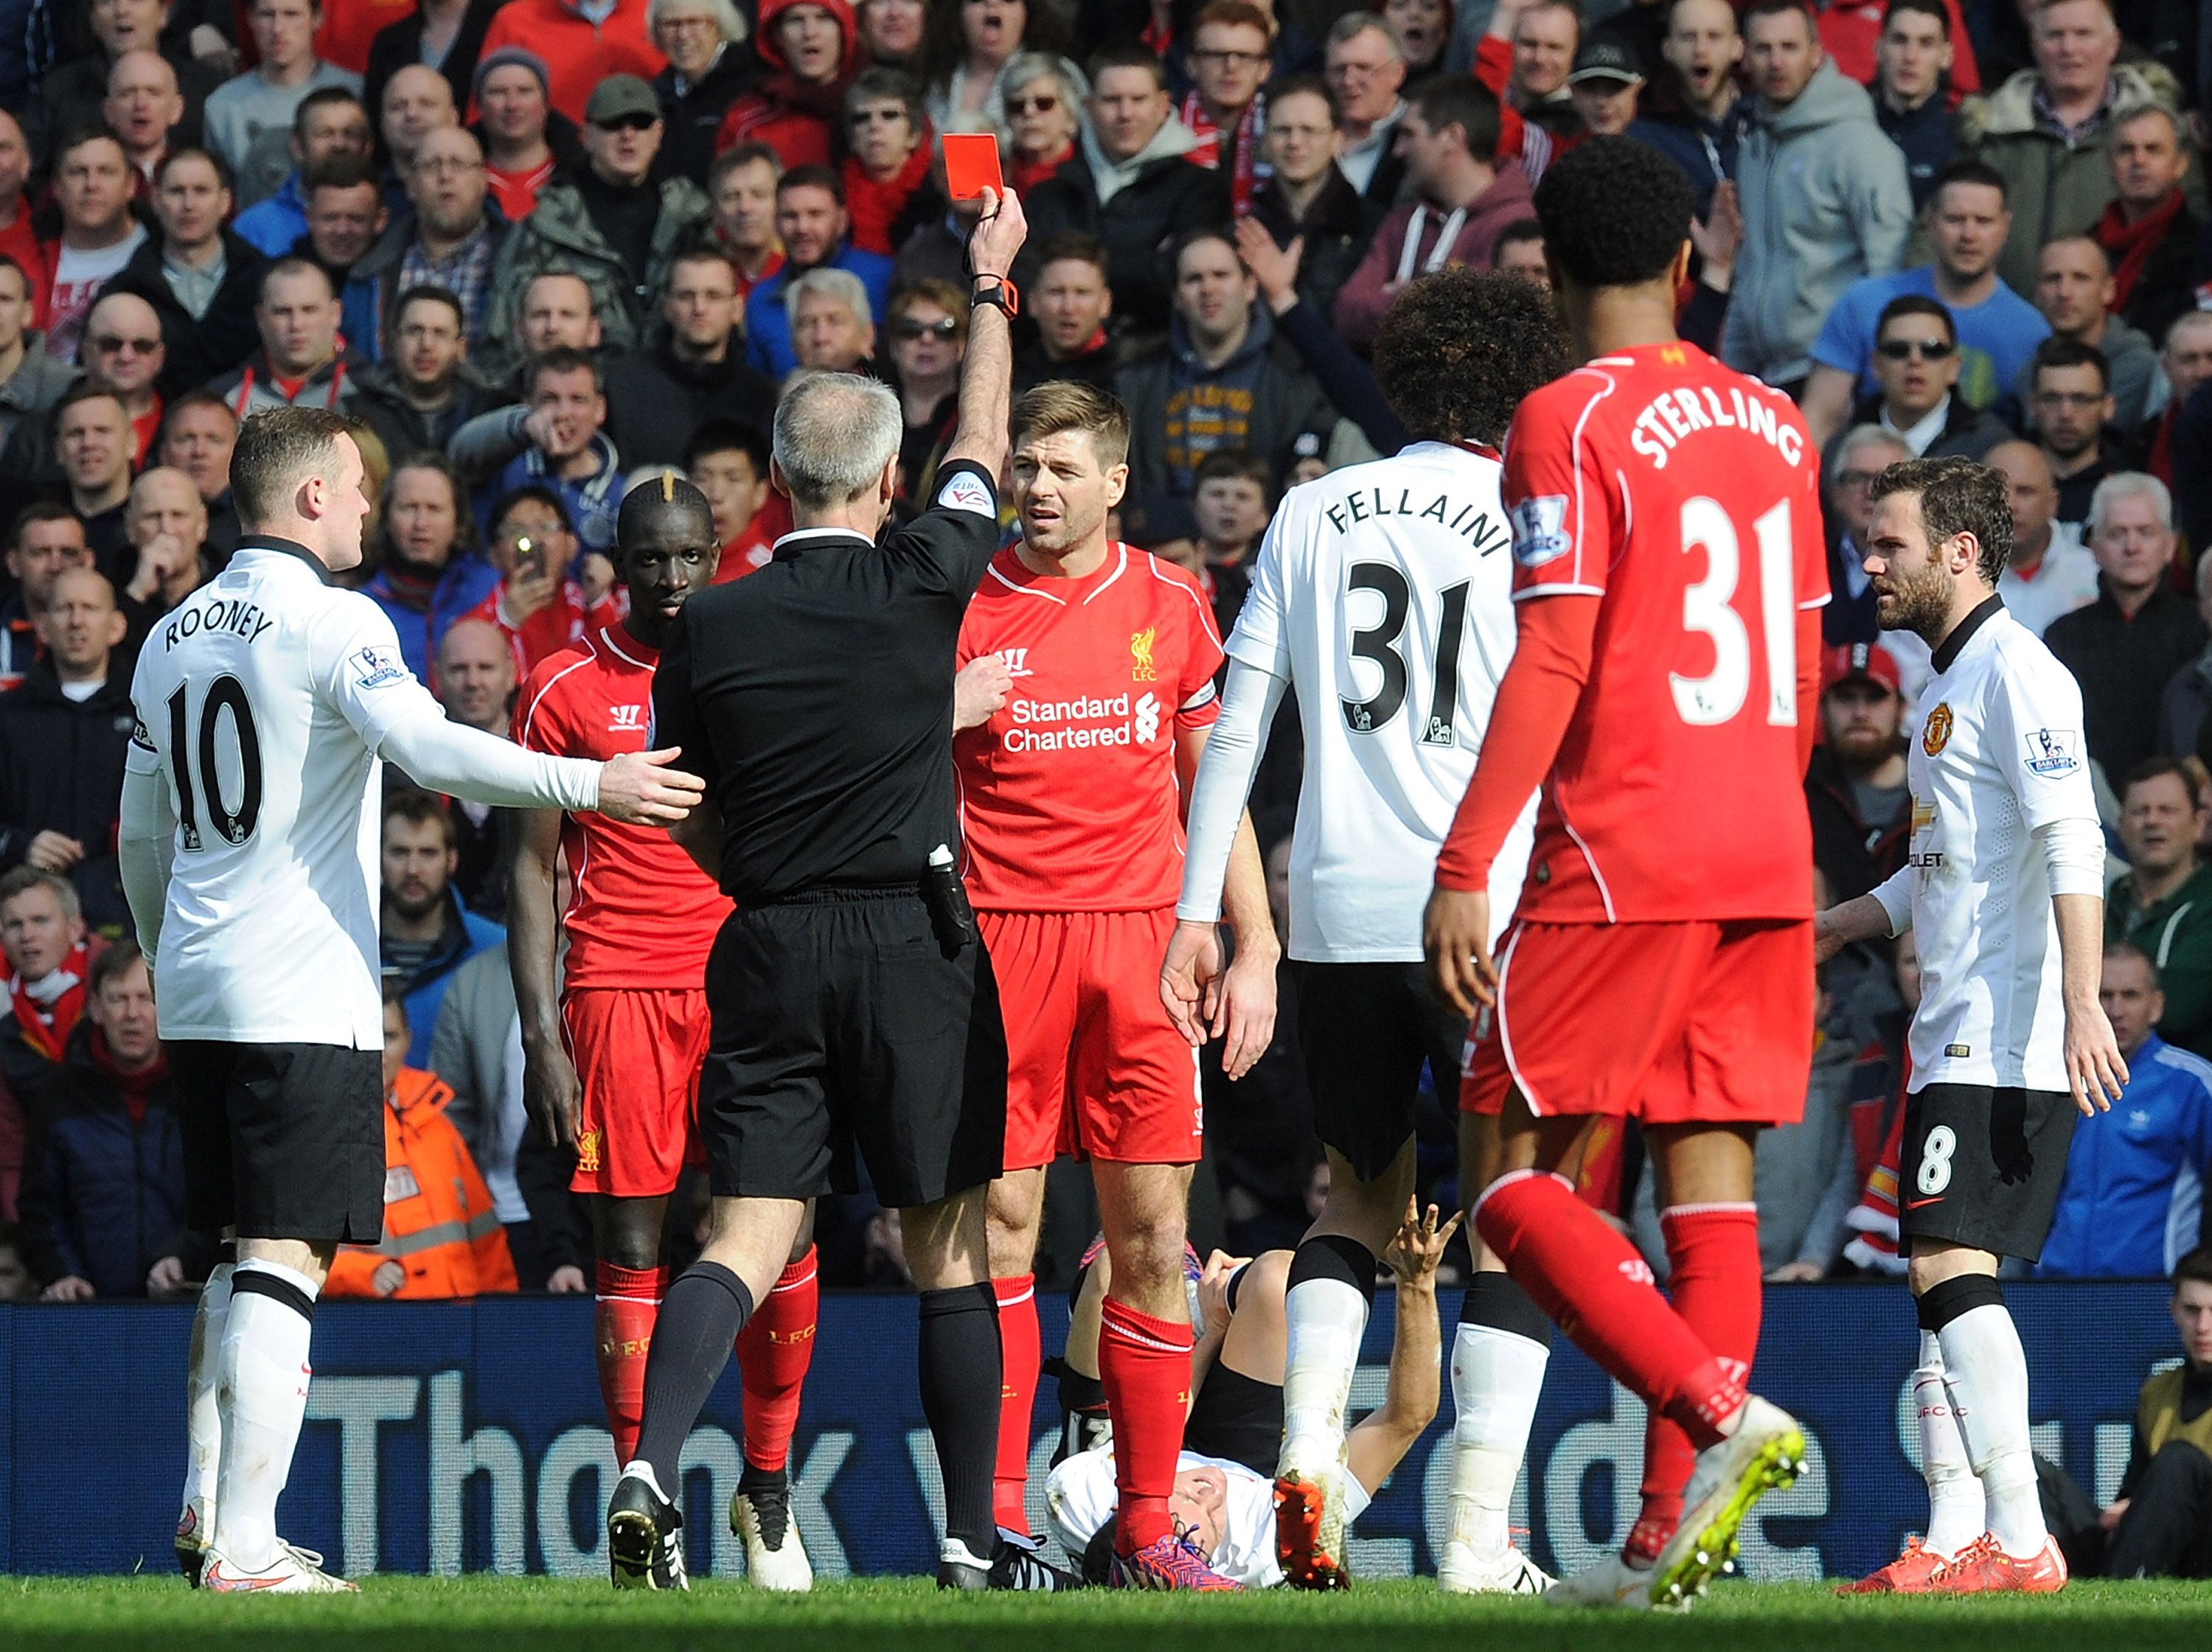 teven Gerrard of Liverpool is shown the red card by referee Martin Atkinson during the Barclays Premier League match between Liverpool and Manchester United at Anfield